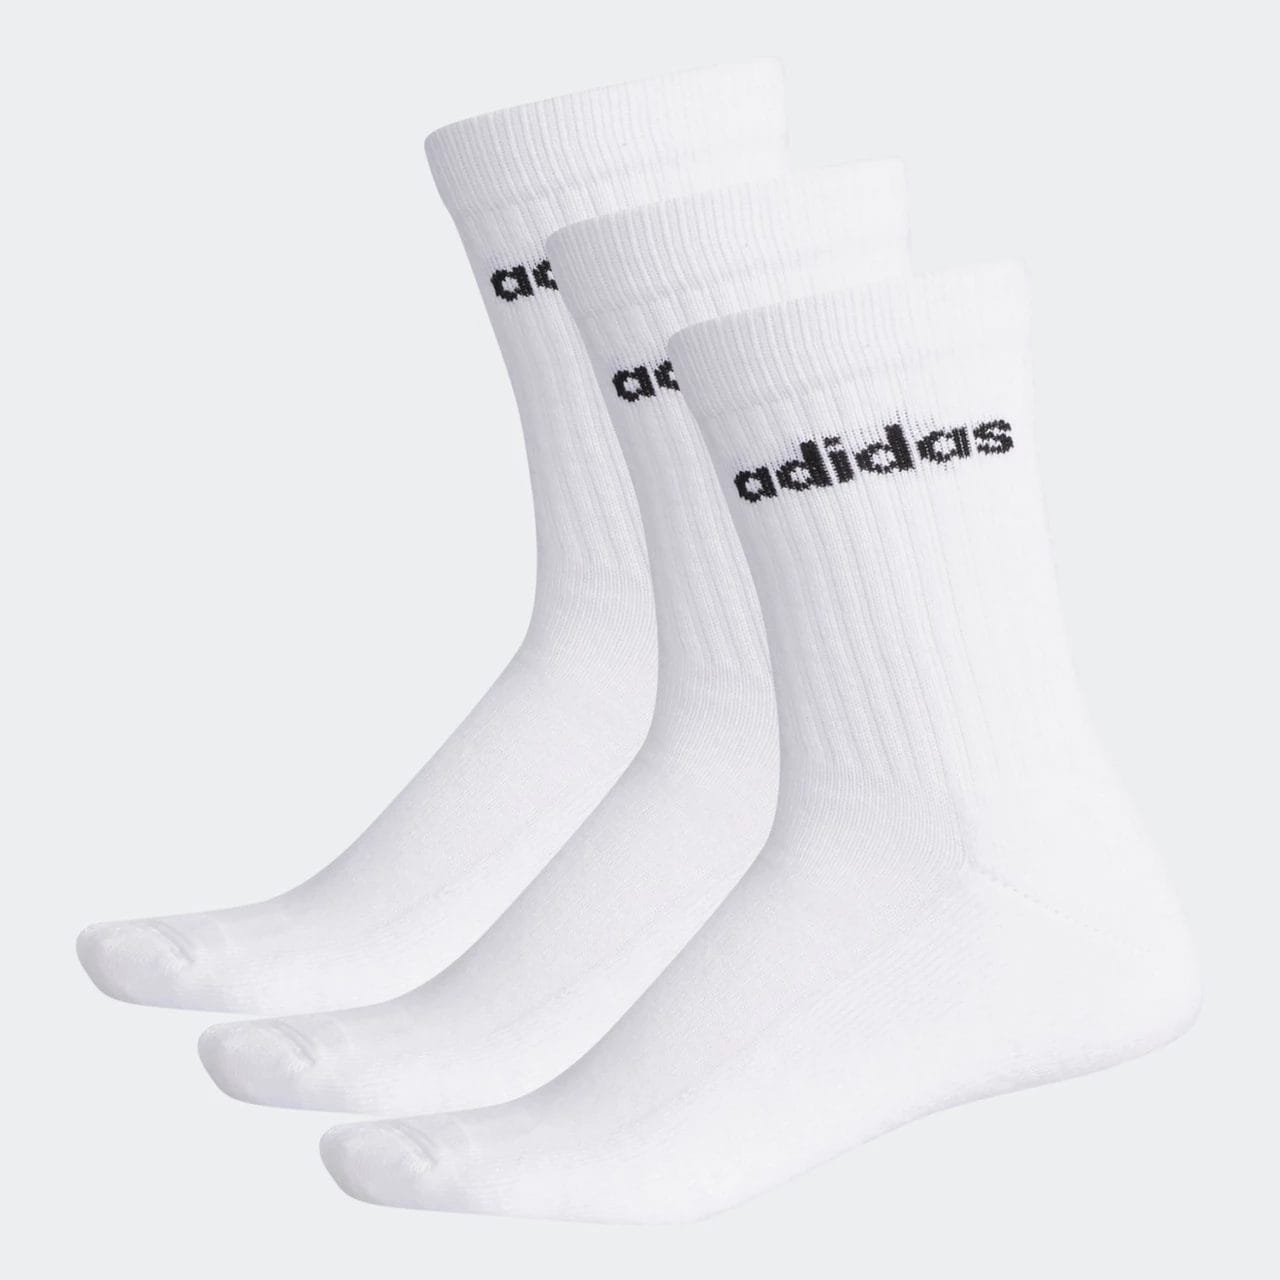 Chaussettes sportstyle camo crew 3pp Adidas